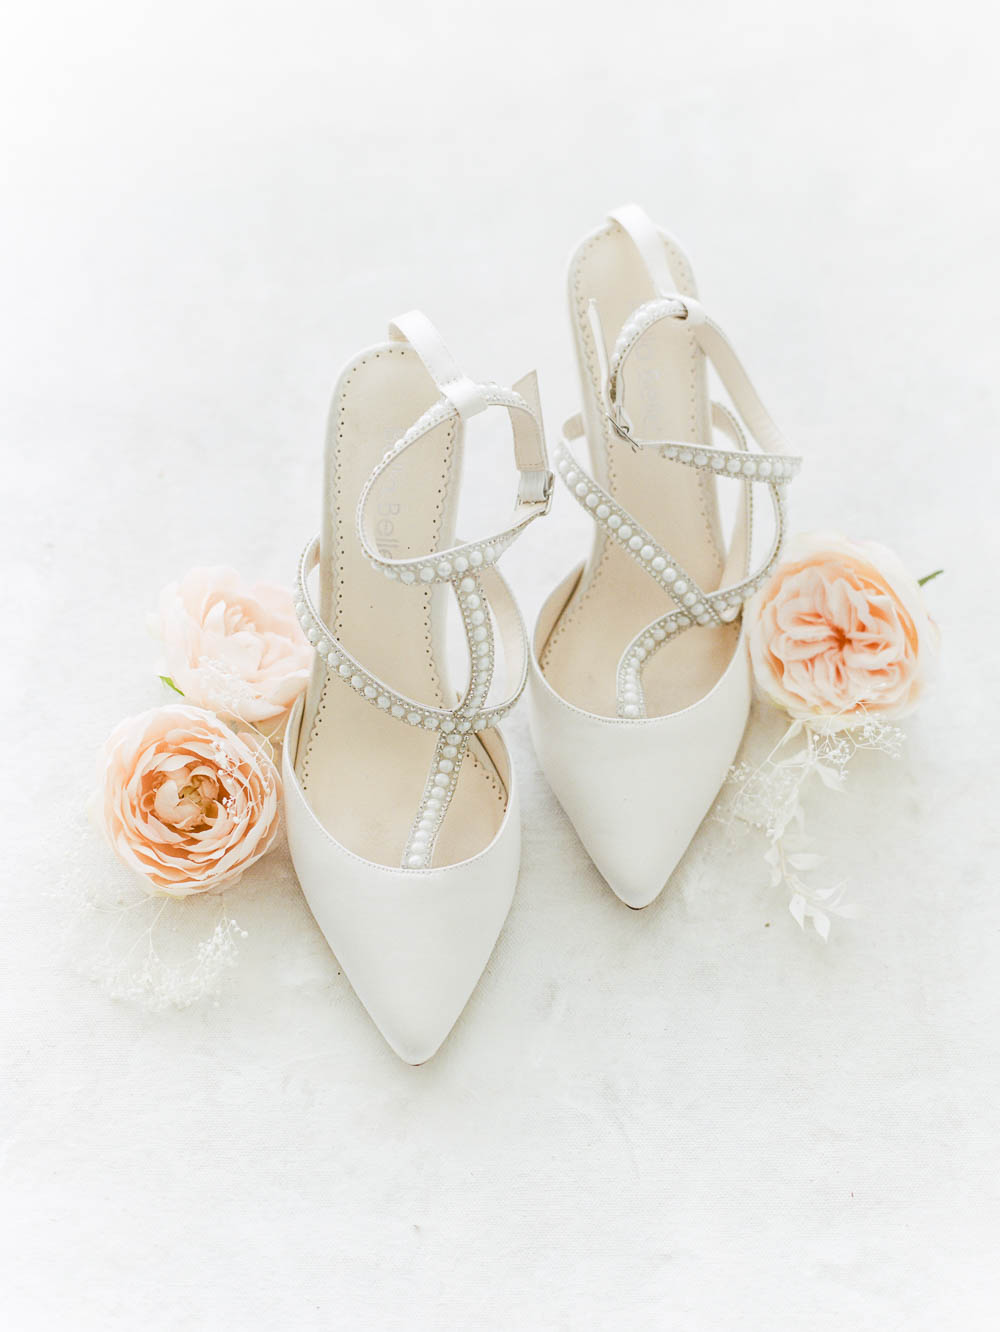 Bella Belle wedding shoes with soft pink florals